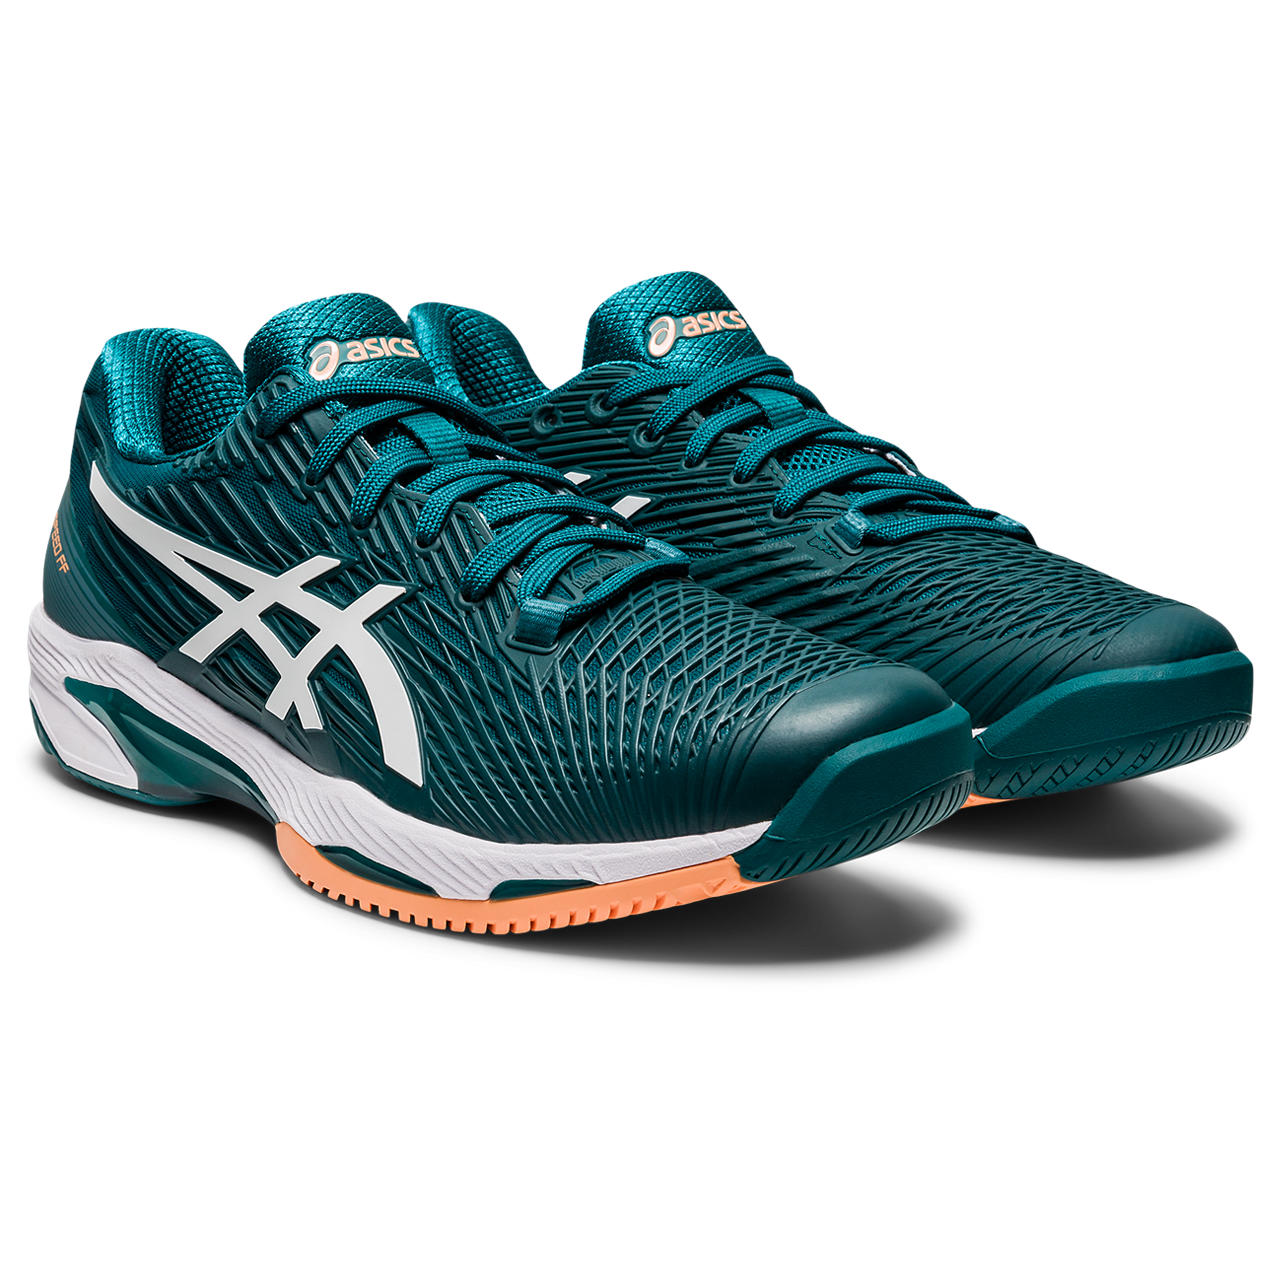 Front angle view of the Men's Solution Speed FF 2 tennis shoe by ASIC in the color Velvet Pine/White